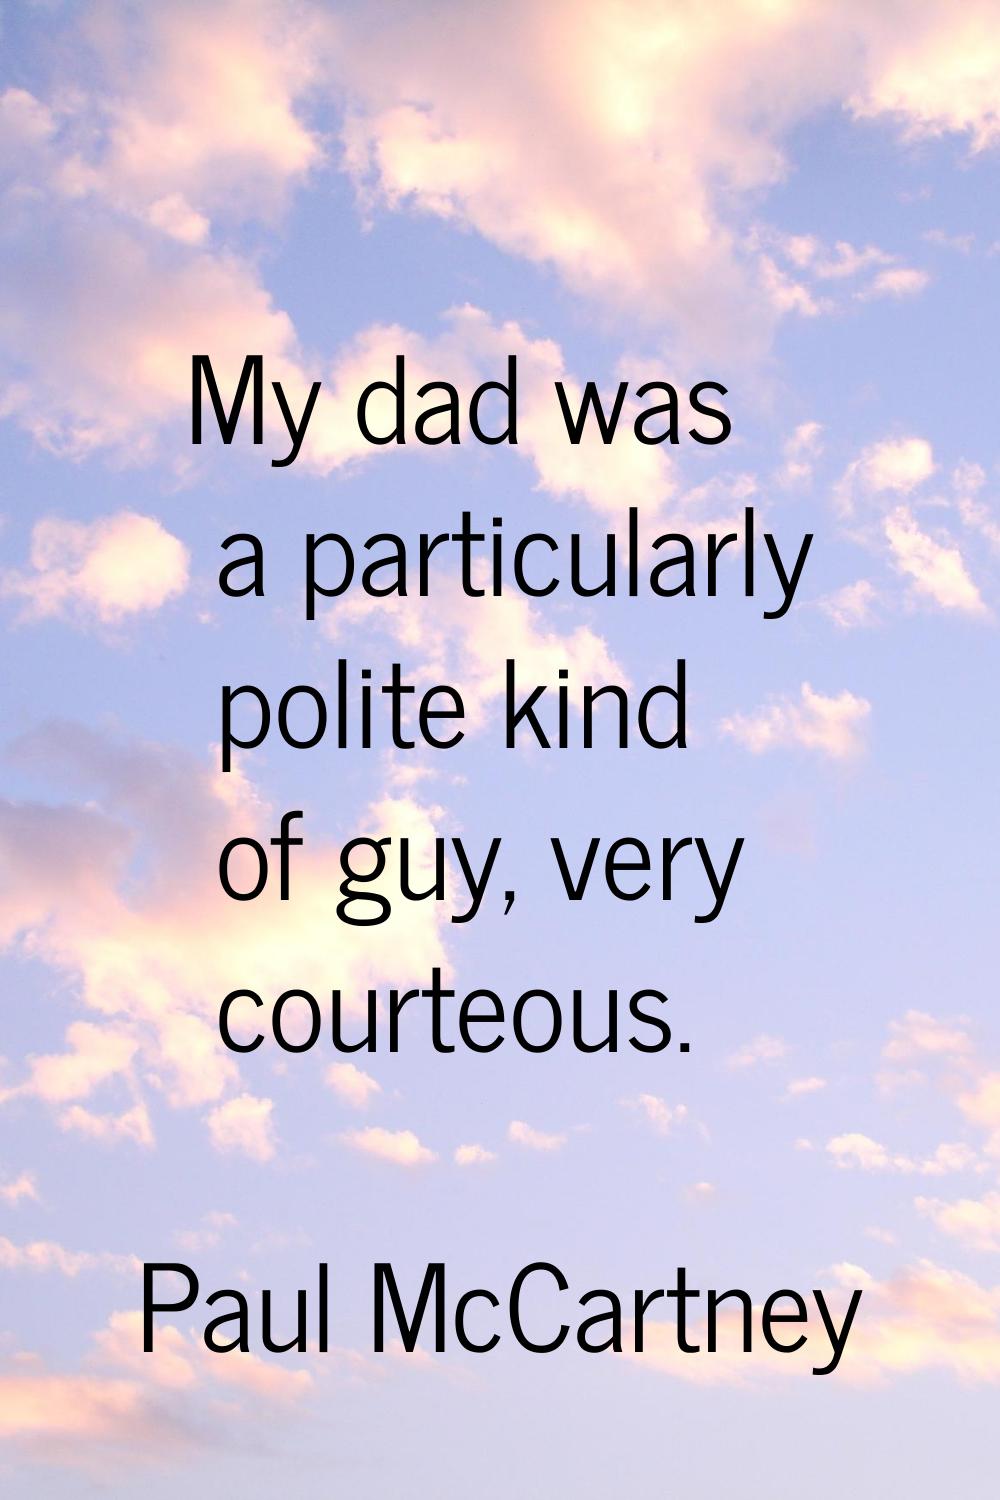 My dad was a particularly polite kind of guy, very courteous.